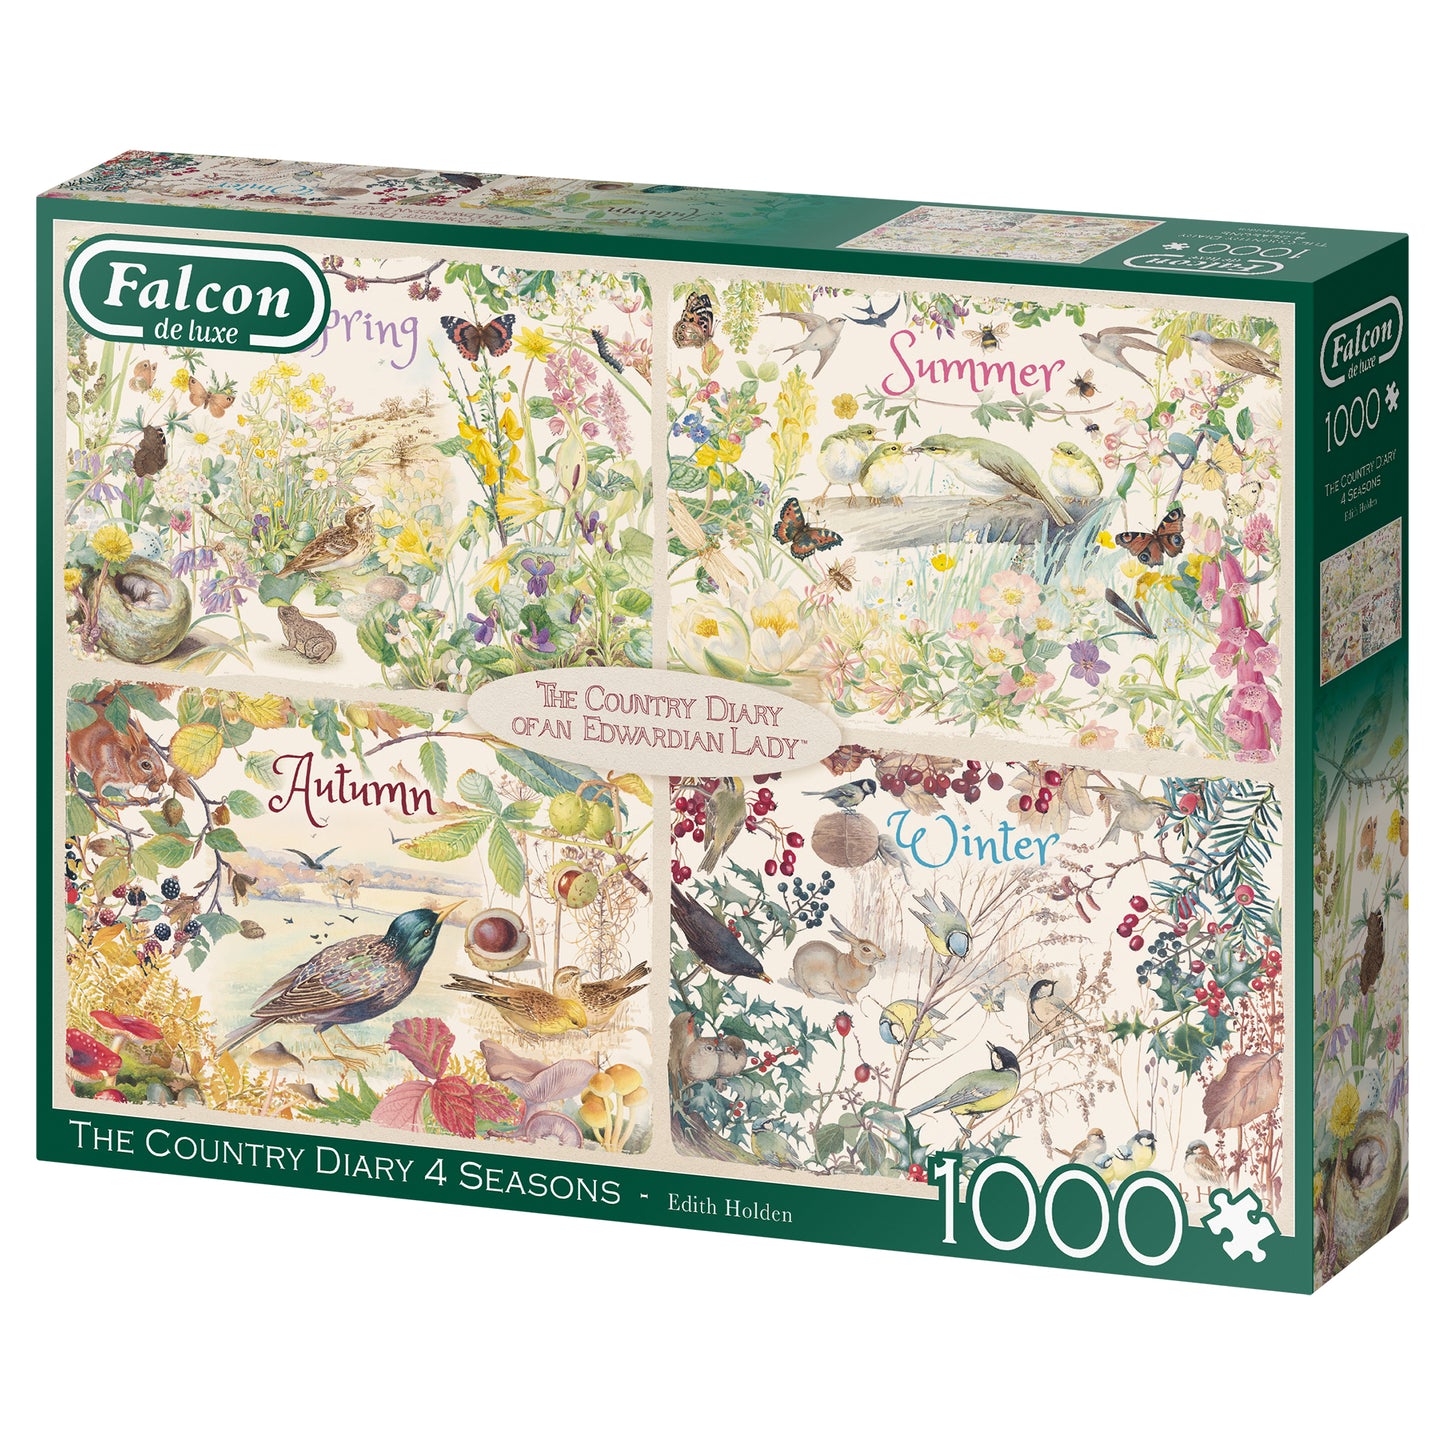 Falcon - The Country Diary 4 Seasons (1000 pieces) - product image - Jumboplay.com